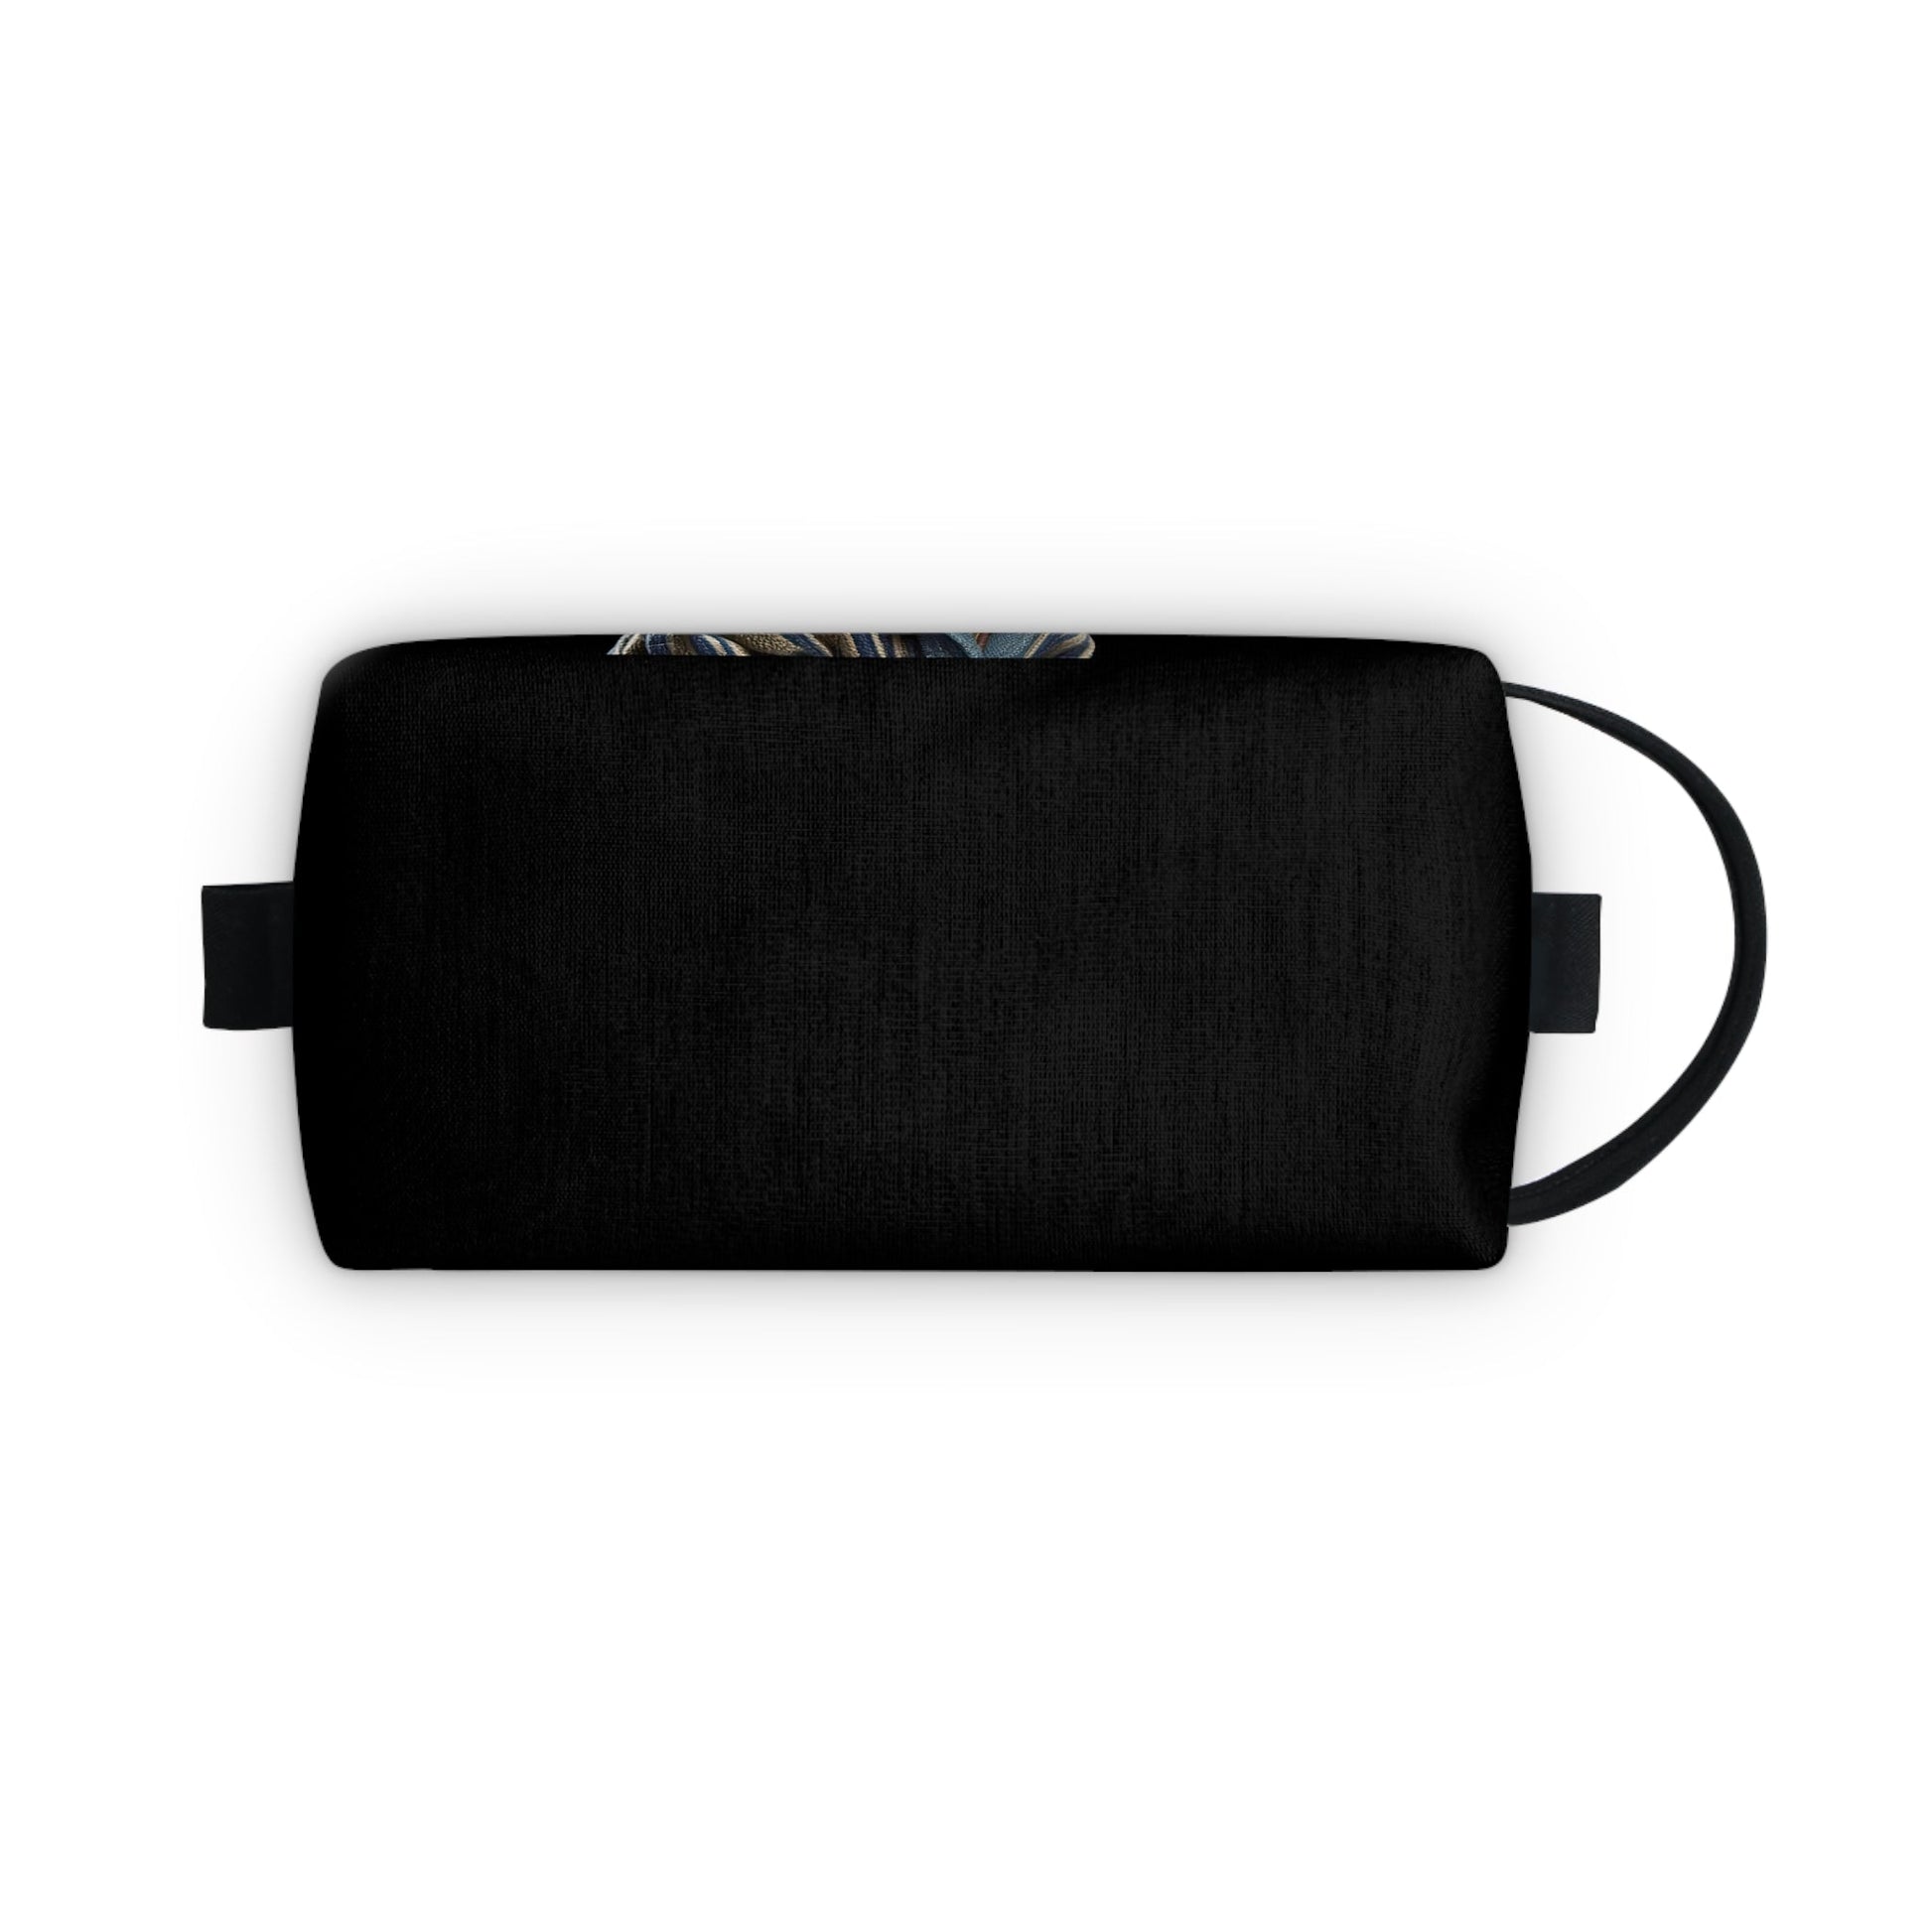 YETTIE Trendy Travel Toiletry Bag | Fashionable Cosmetic Cases